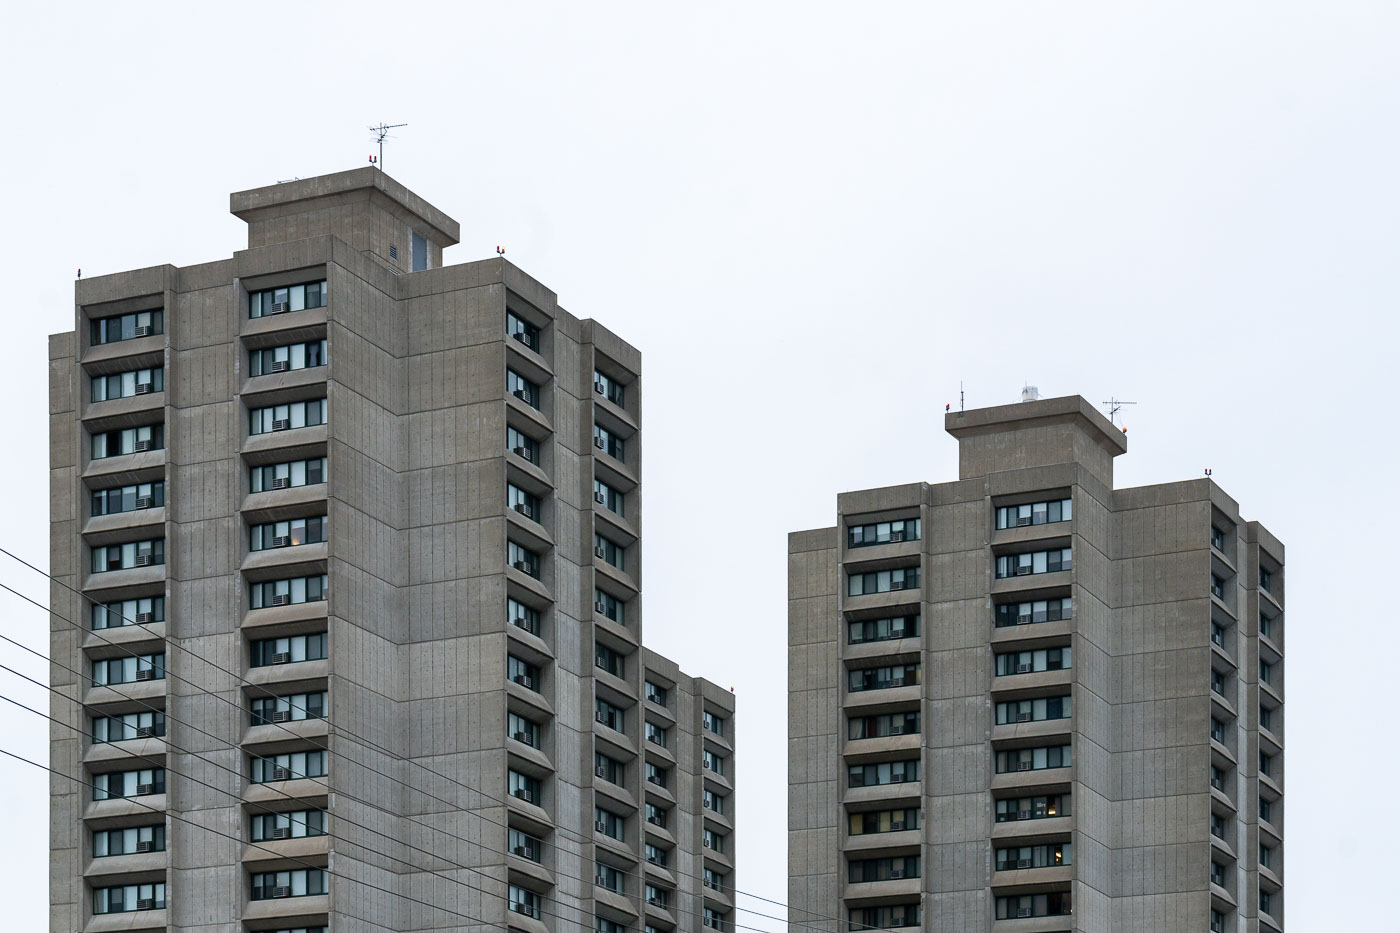 Two brutalist towers in Minneapolis